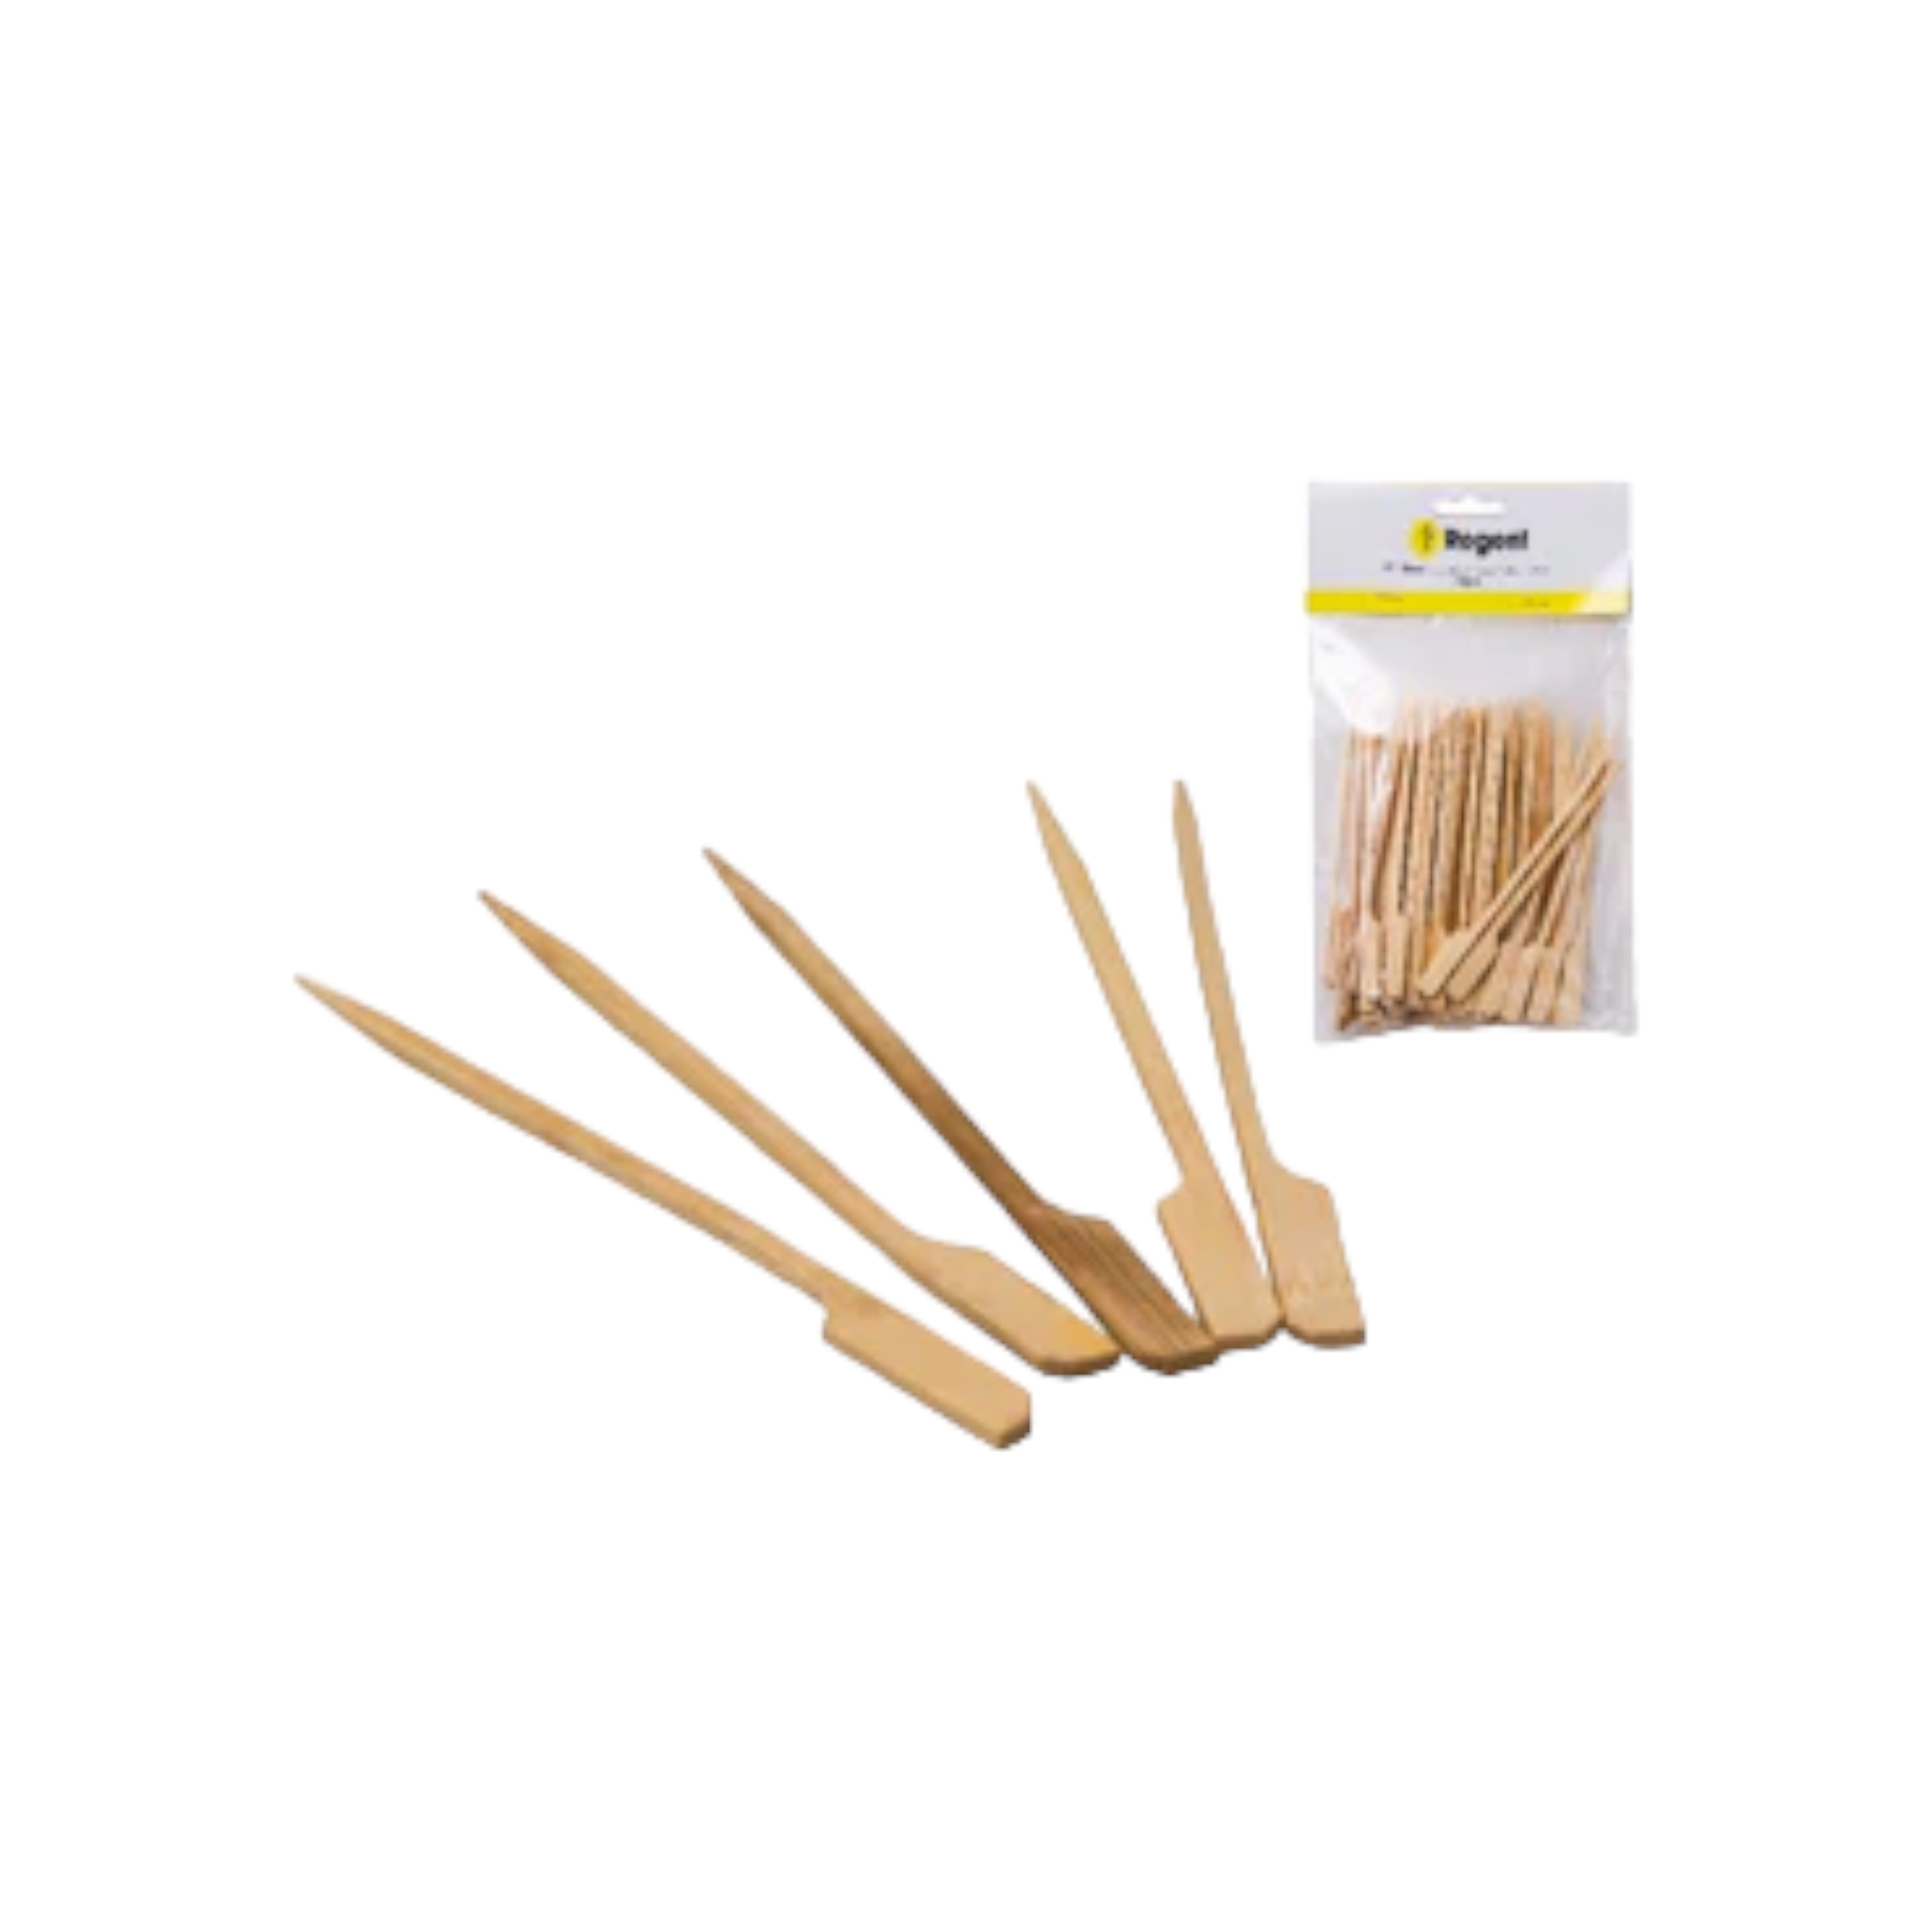 Regent Bamboo Disposable Food Paddle Picks 110mm 50pack 35105